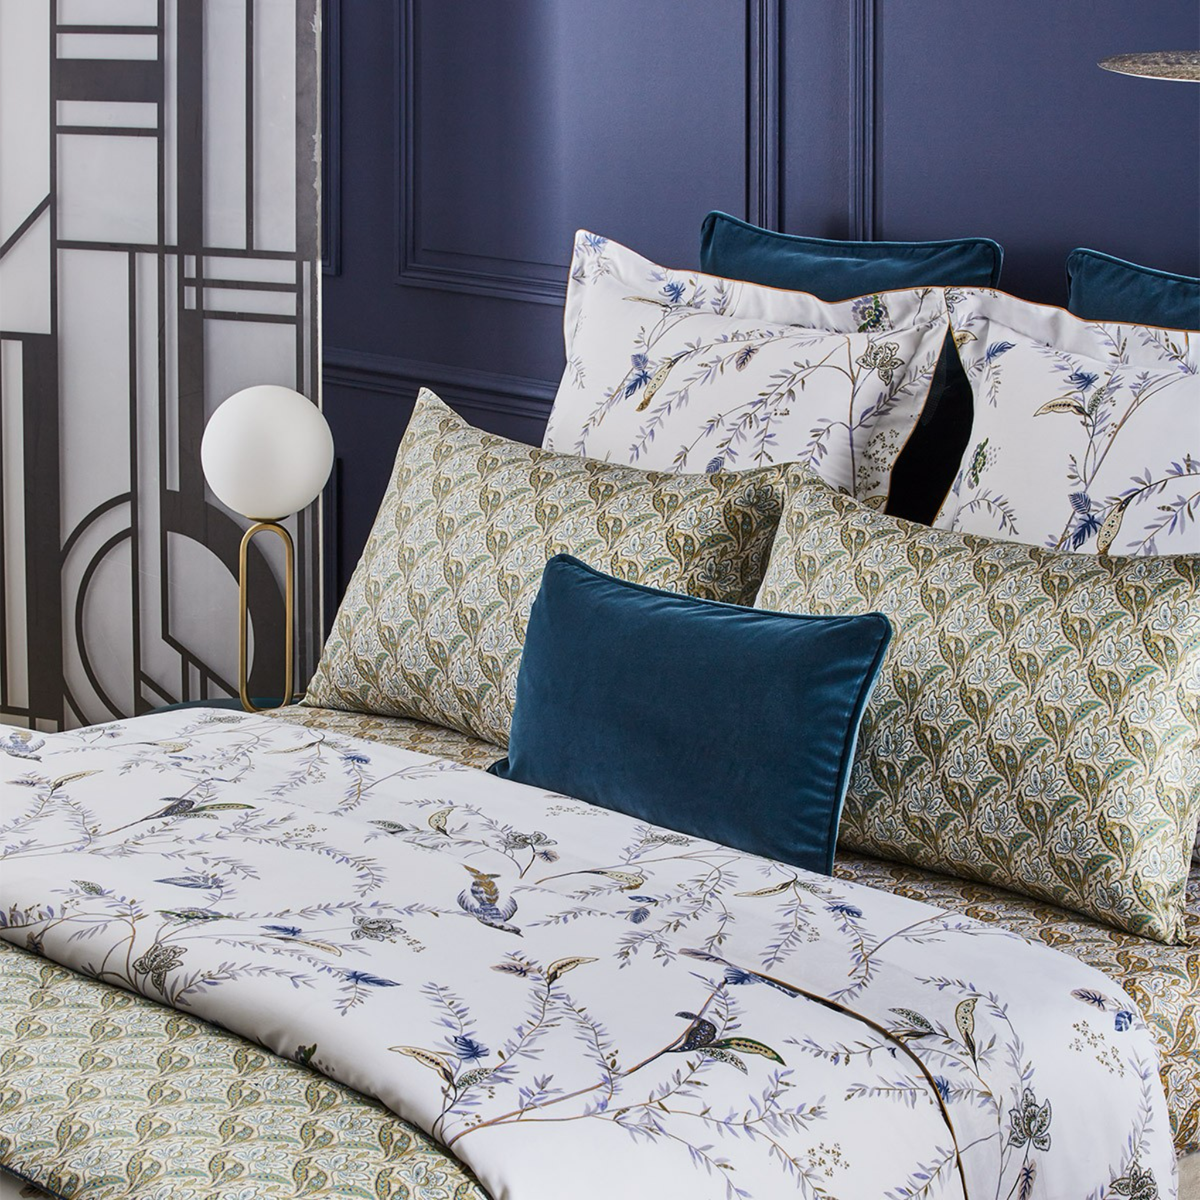 Closeup of Full Bed Dressed in Yves Delorme Grimani Bedding